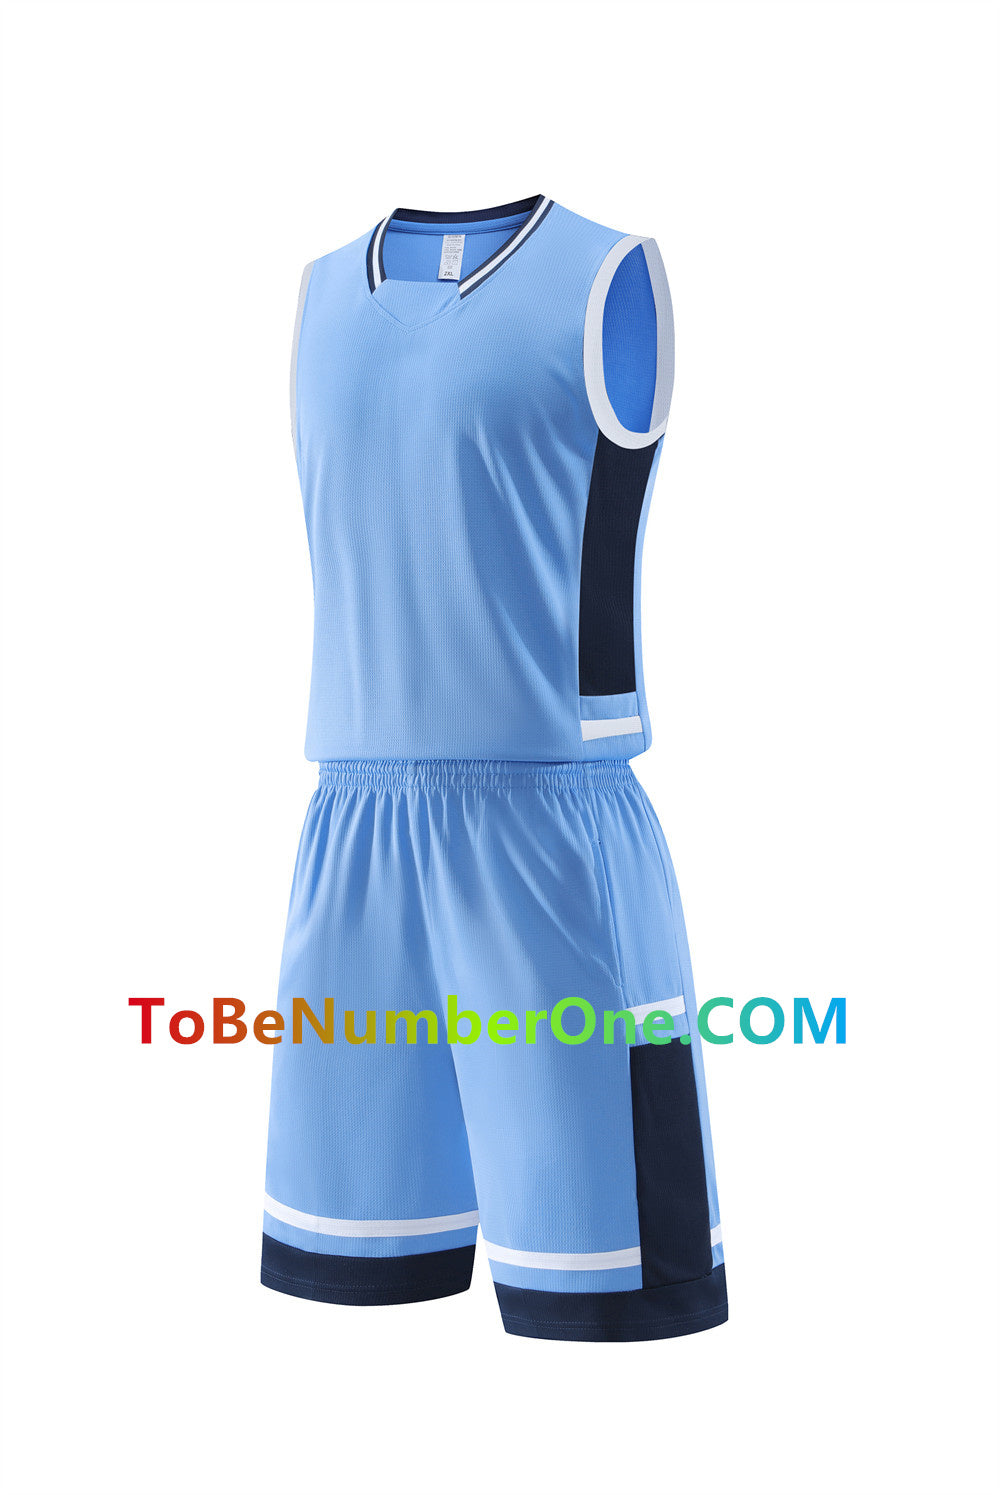 Customize instock High Quality Quick-drying basketball uniforms print with team name , player and number.  jerseys&shorts with pocket 606#